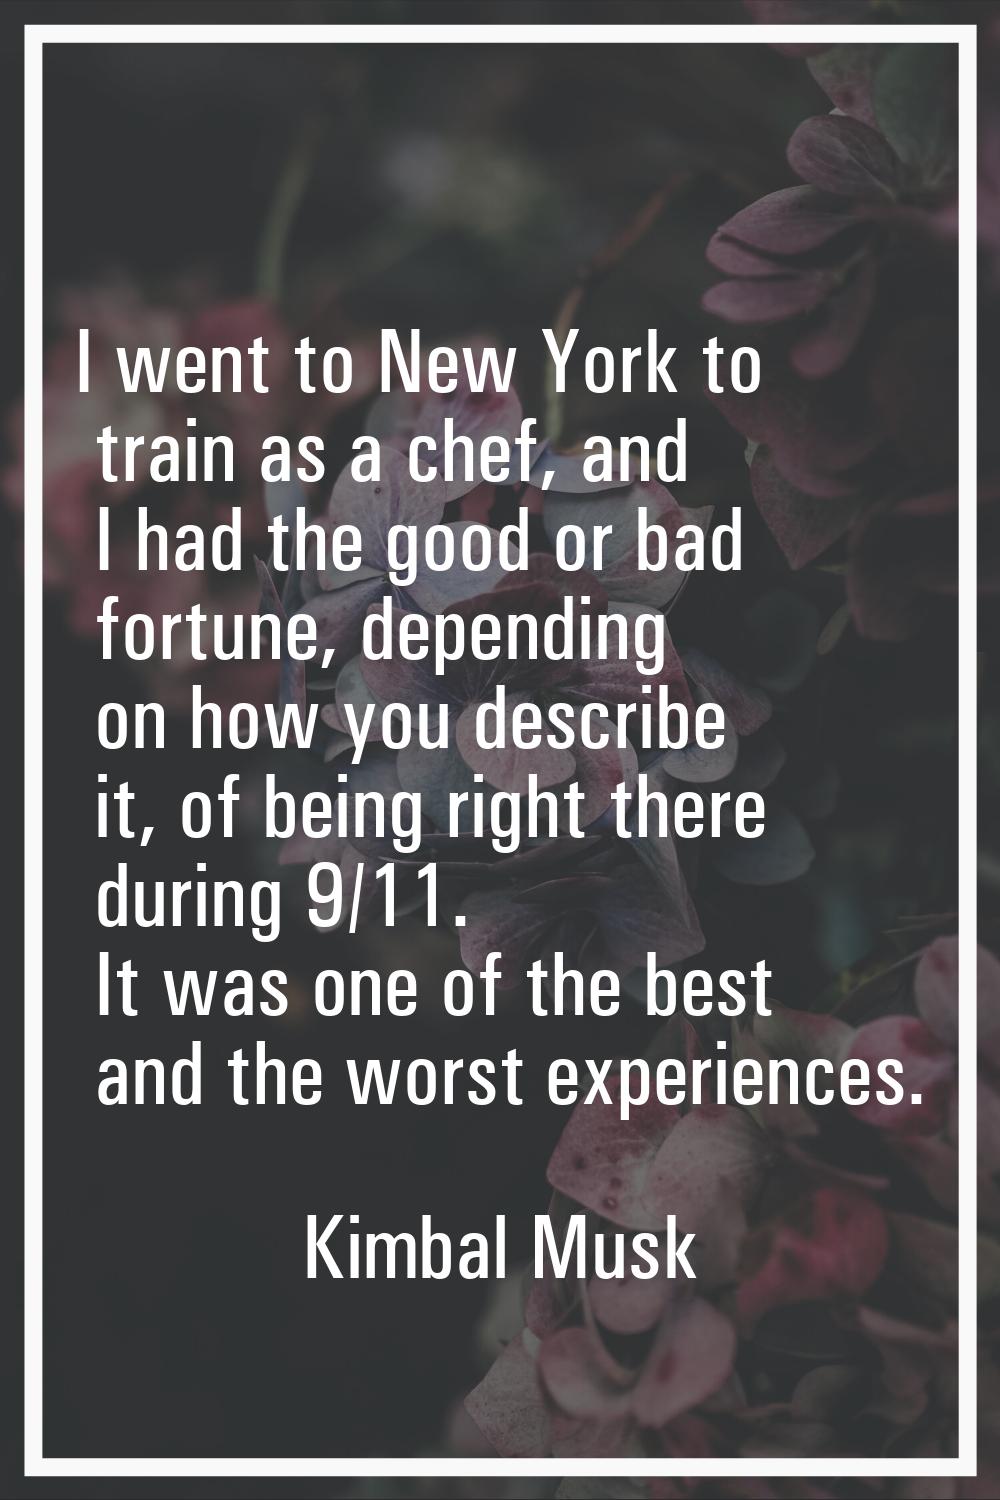 I went to New York to train as a chef, and I had the good or bad fortune, depending on how you desc